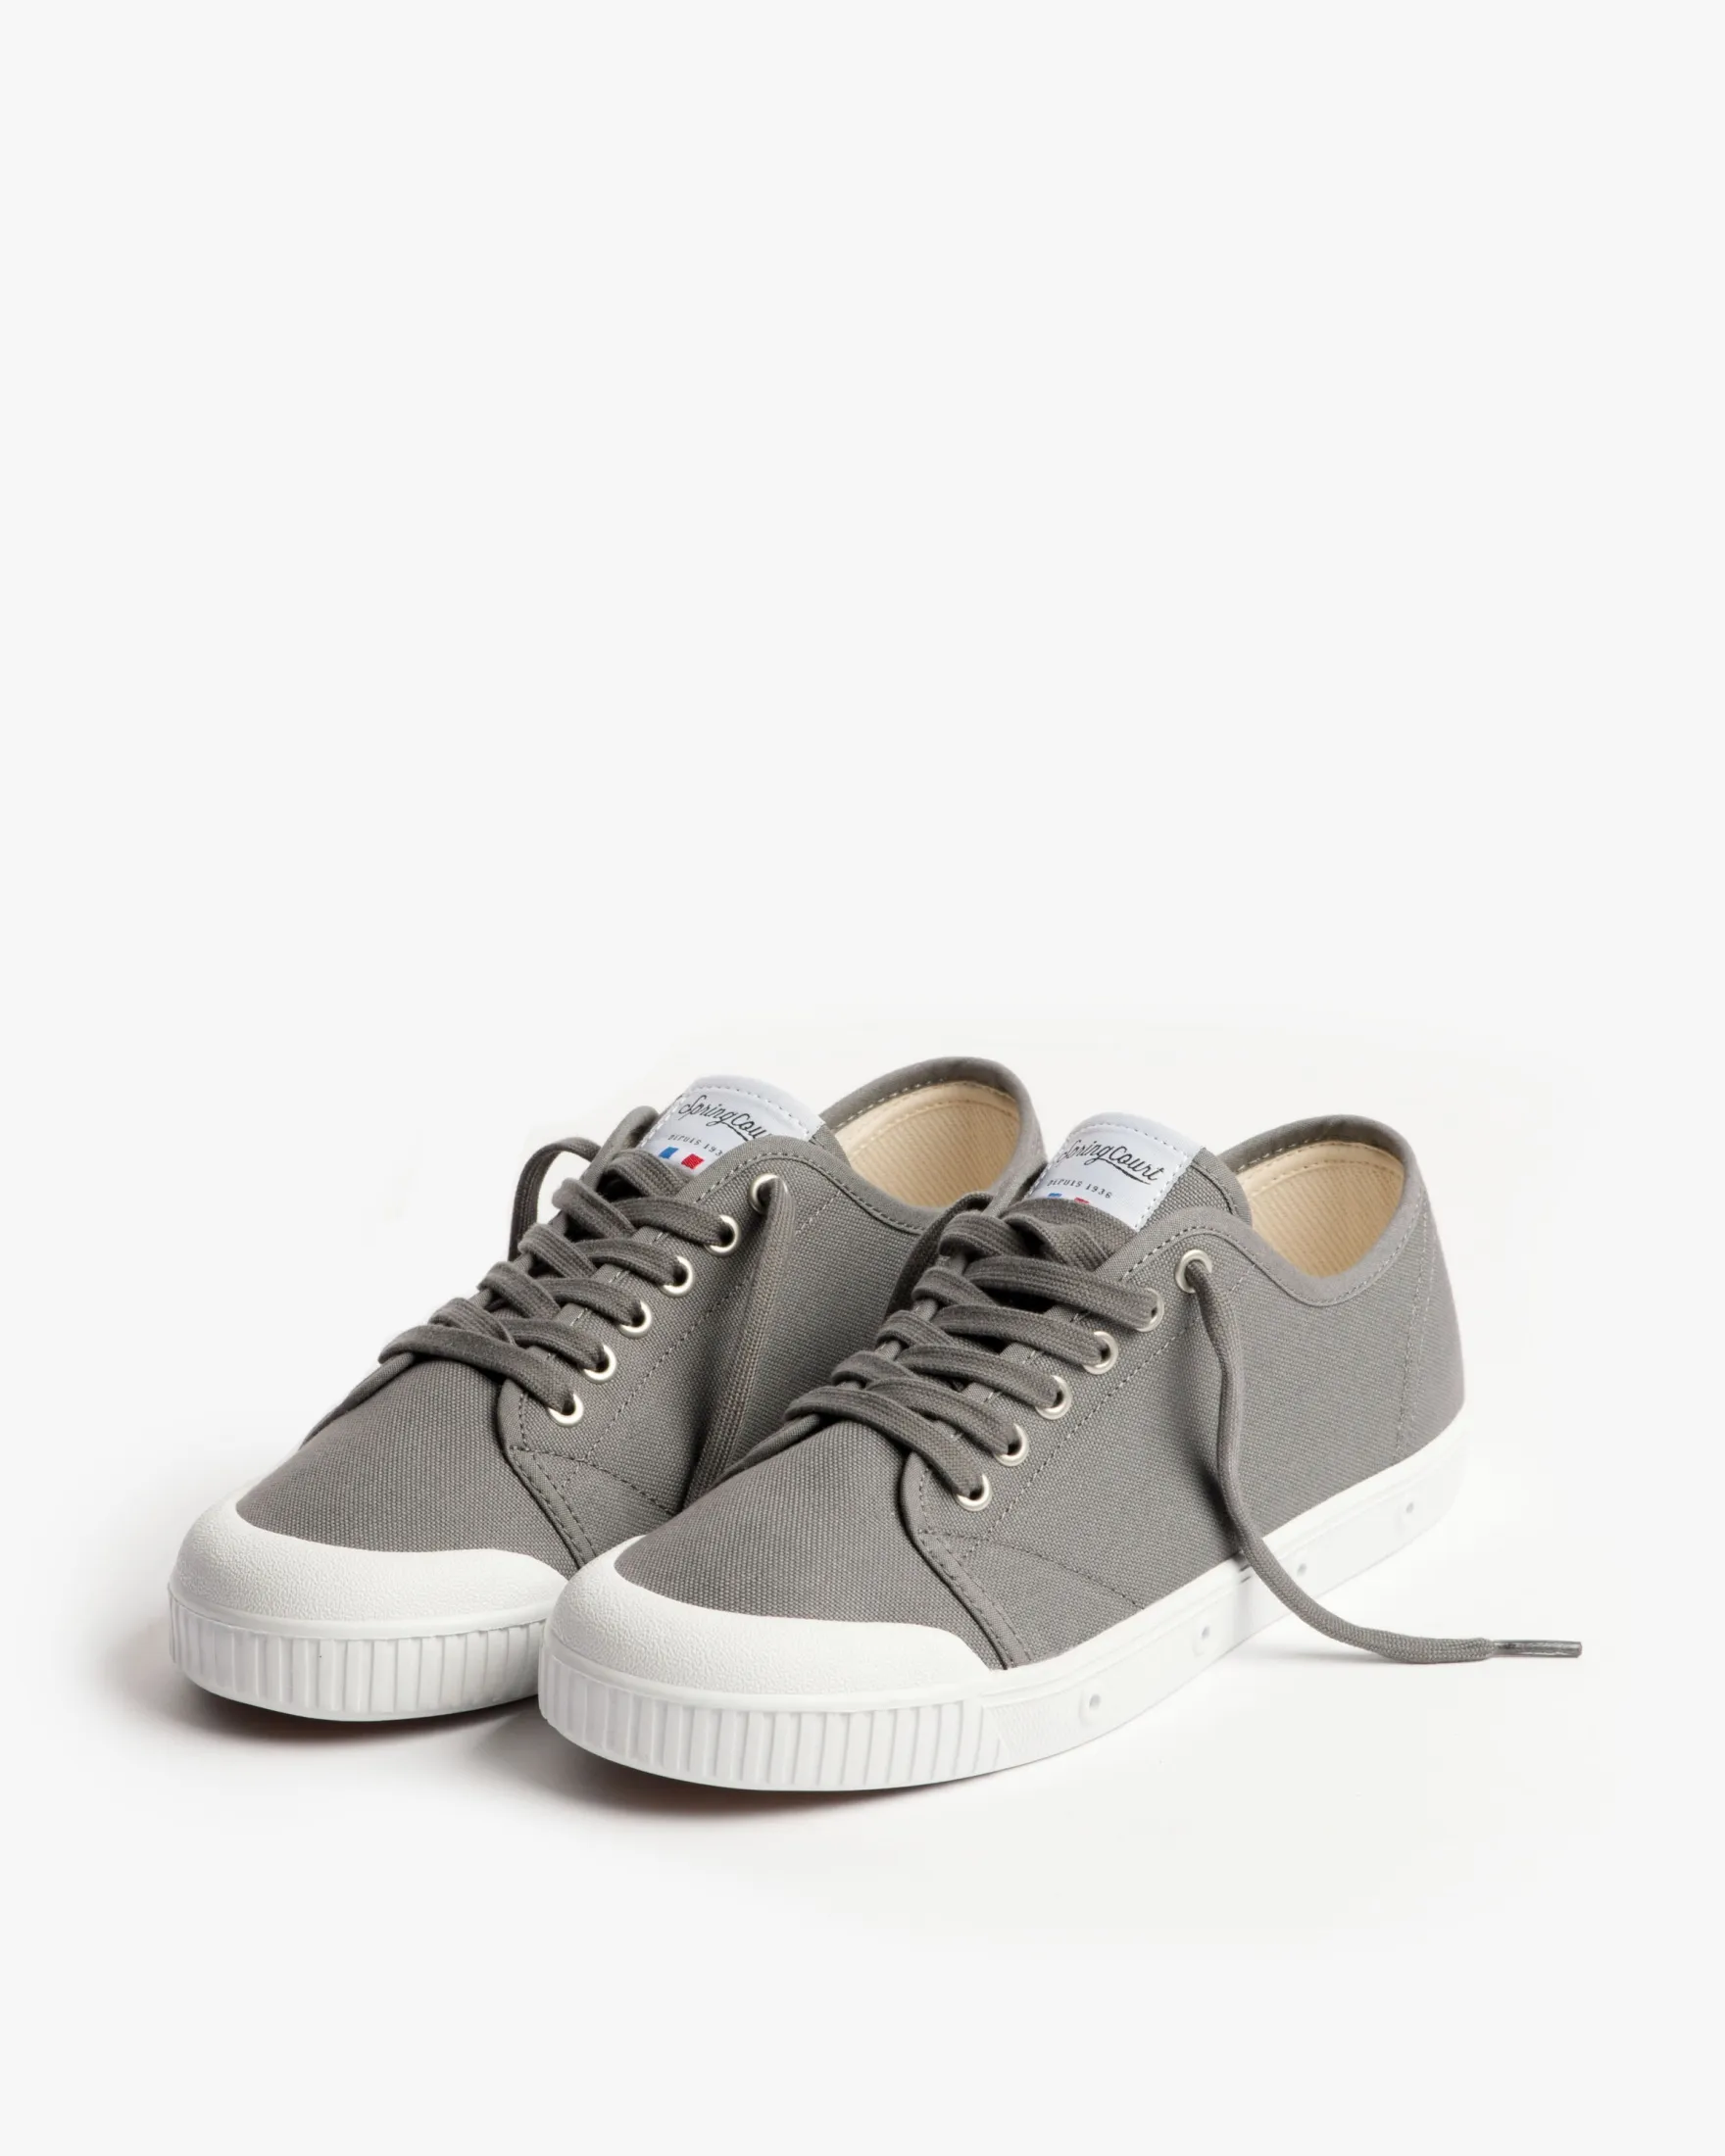 Grey canvas high top trainers